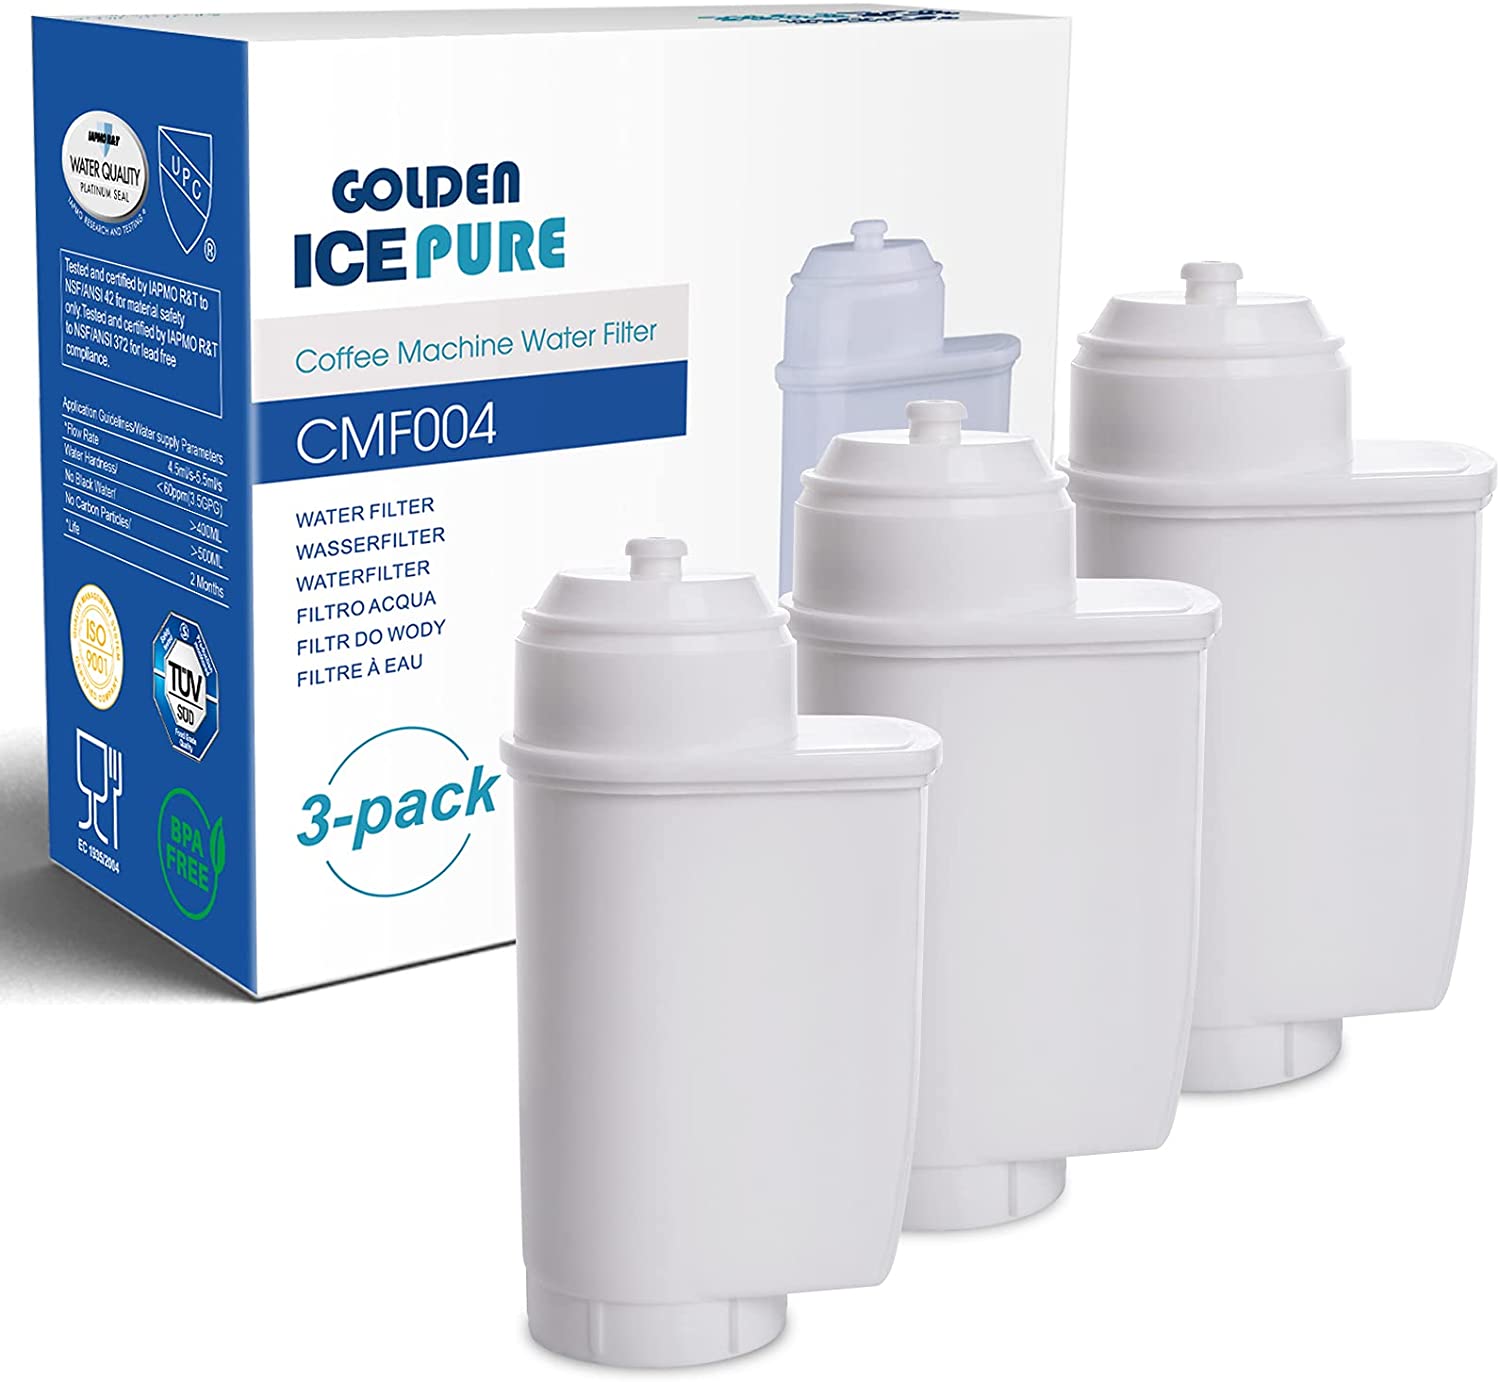 Golden Icepure Tüv Süd NSF Certified Fully Automatic Coffee Machine Water Filter CMF004, Replacement for Siemens EQ Series, EQ 6, Siemens TZ70003, TCZ7003, TCZ7033